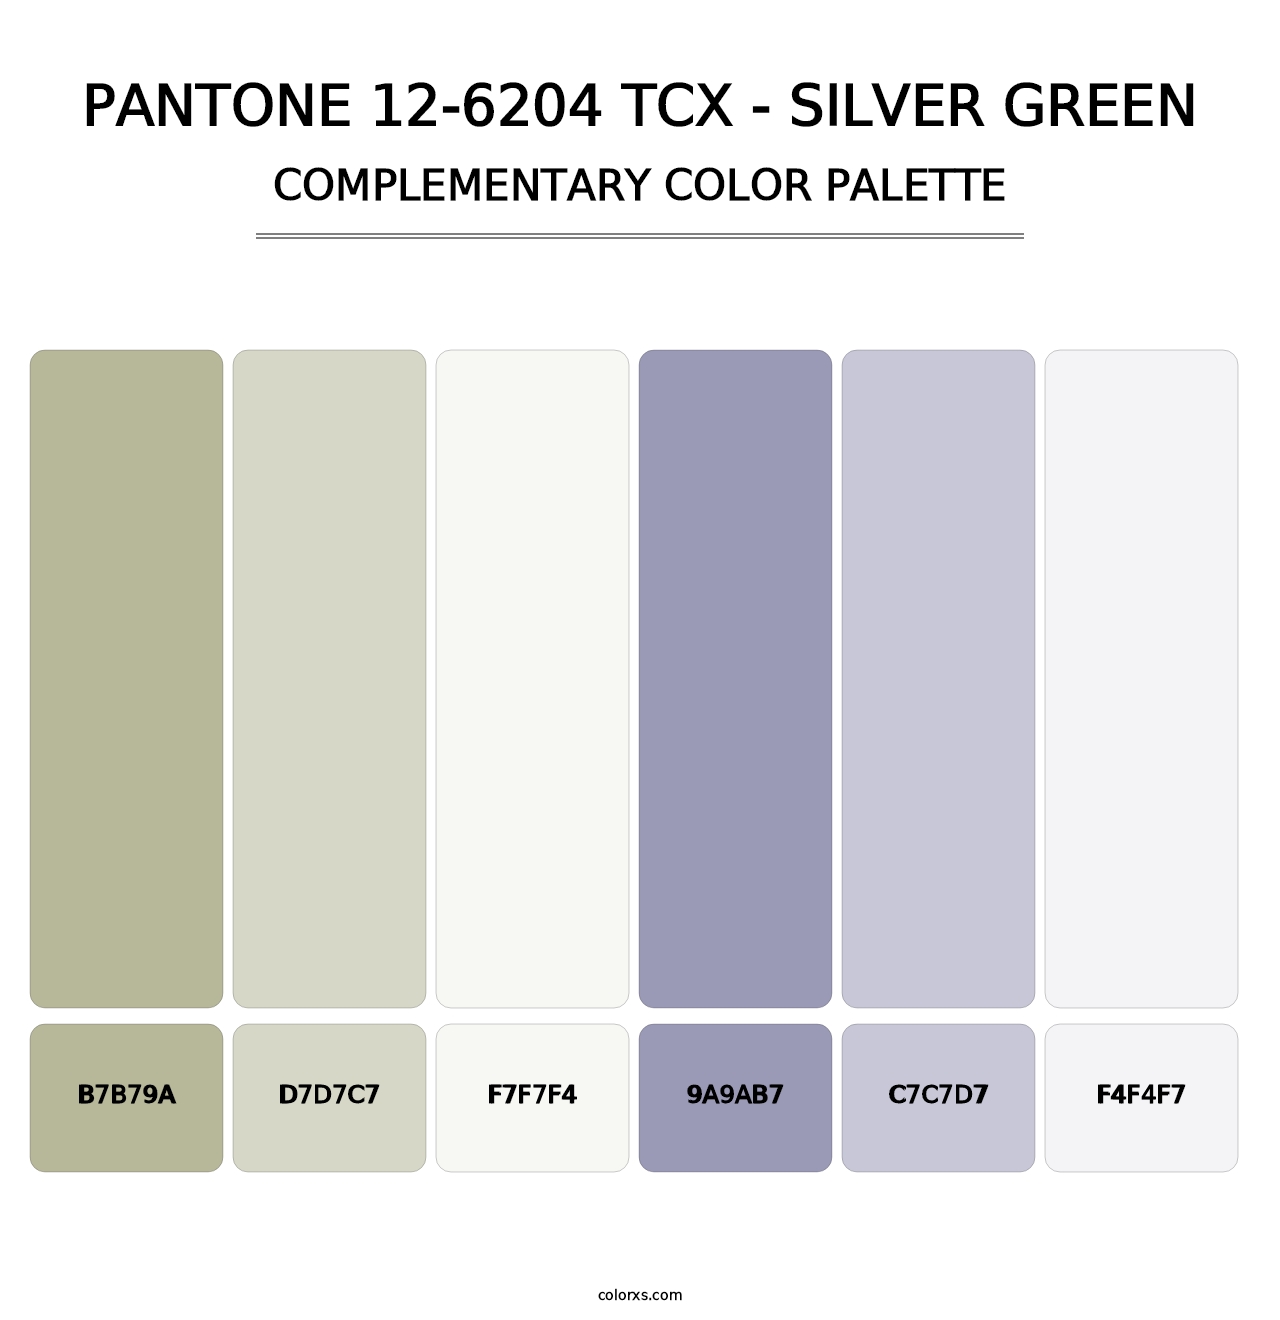 PANTONE 12-6204 TCX - Silver Green - Complementary Color Palette